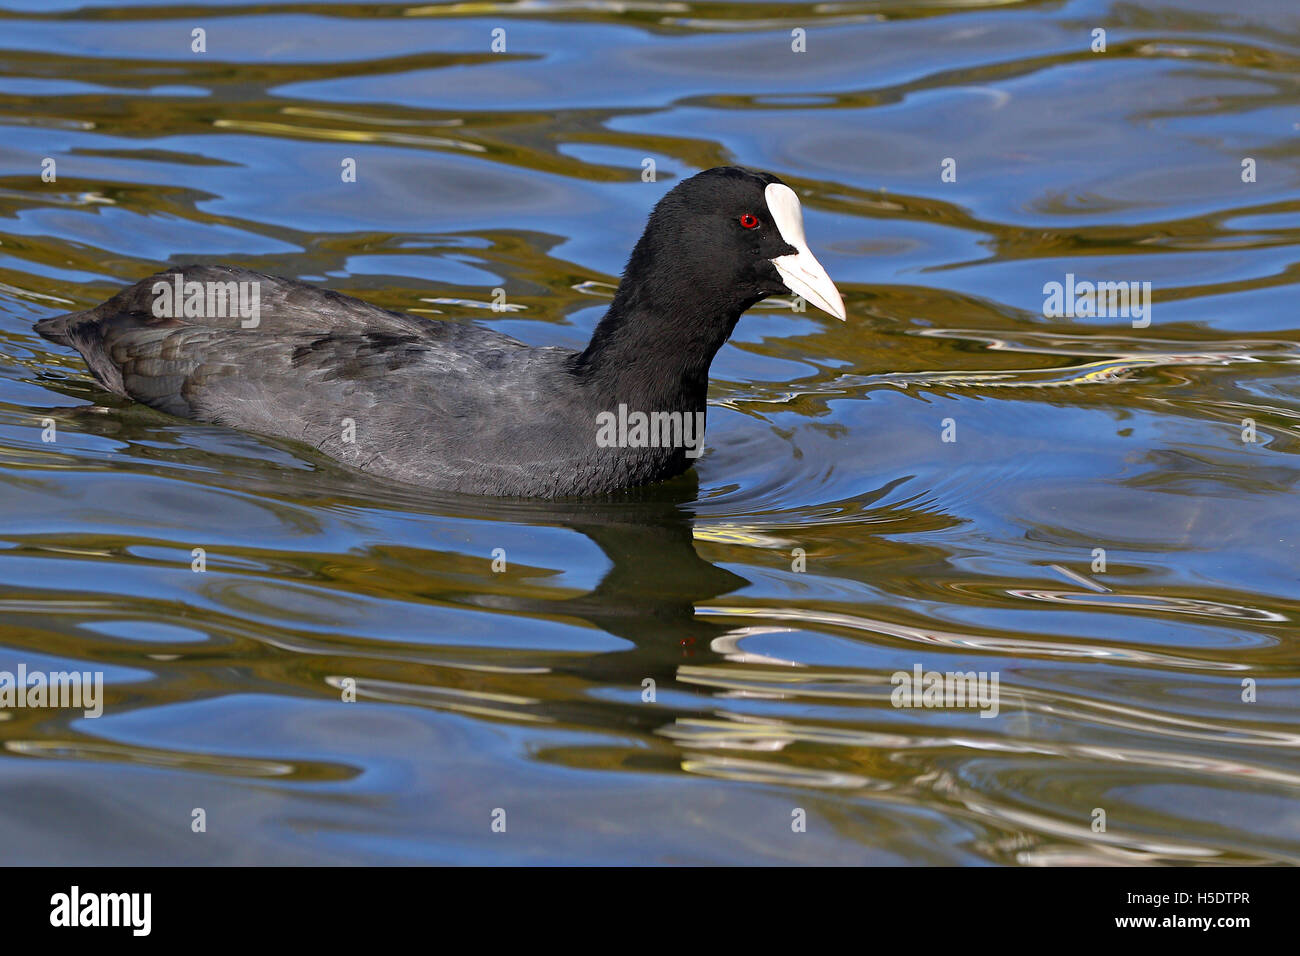 Eurasian coot swimming in blue water with reflections Stock Photo